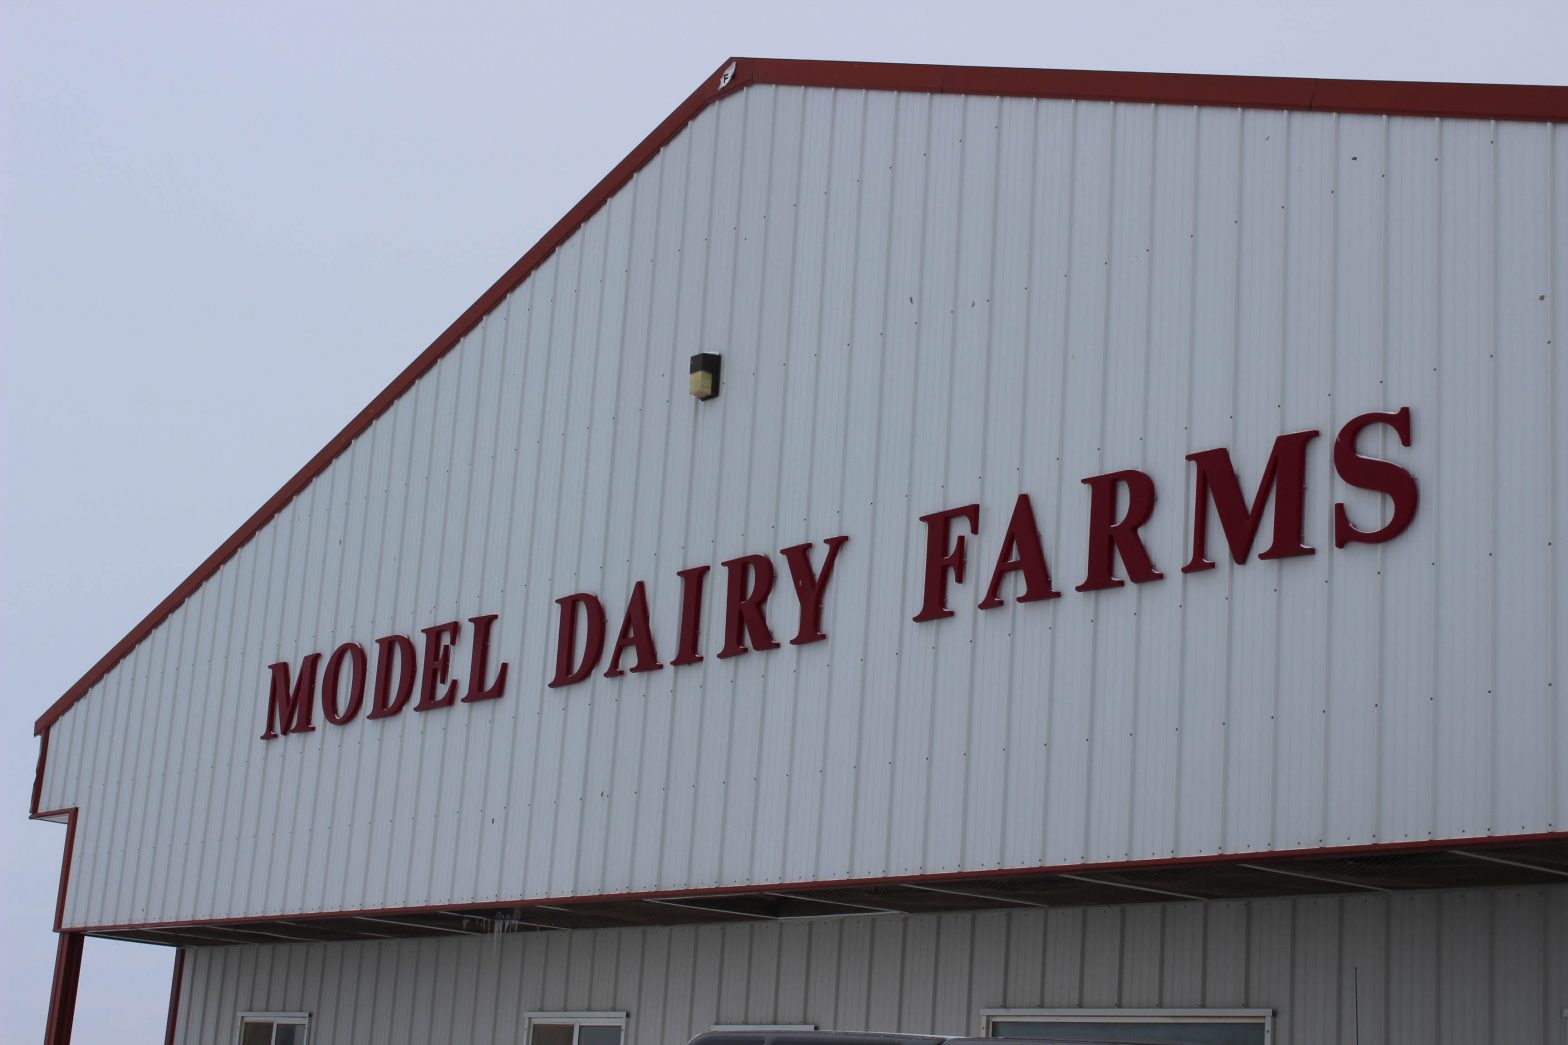 Kyle Levetzow owns and operates Model Dairy Farms with his wife, Amy, just outside of Dodgeville, Wisconsin.  He purchased the farm from his father in 2006.